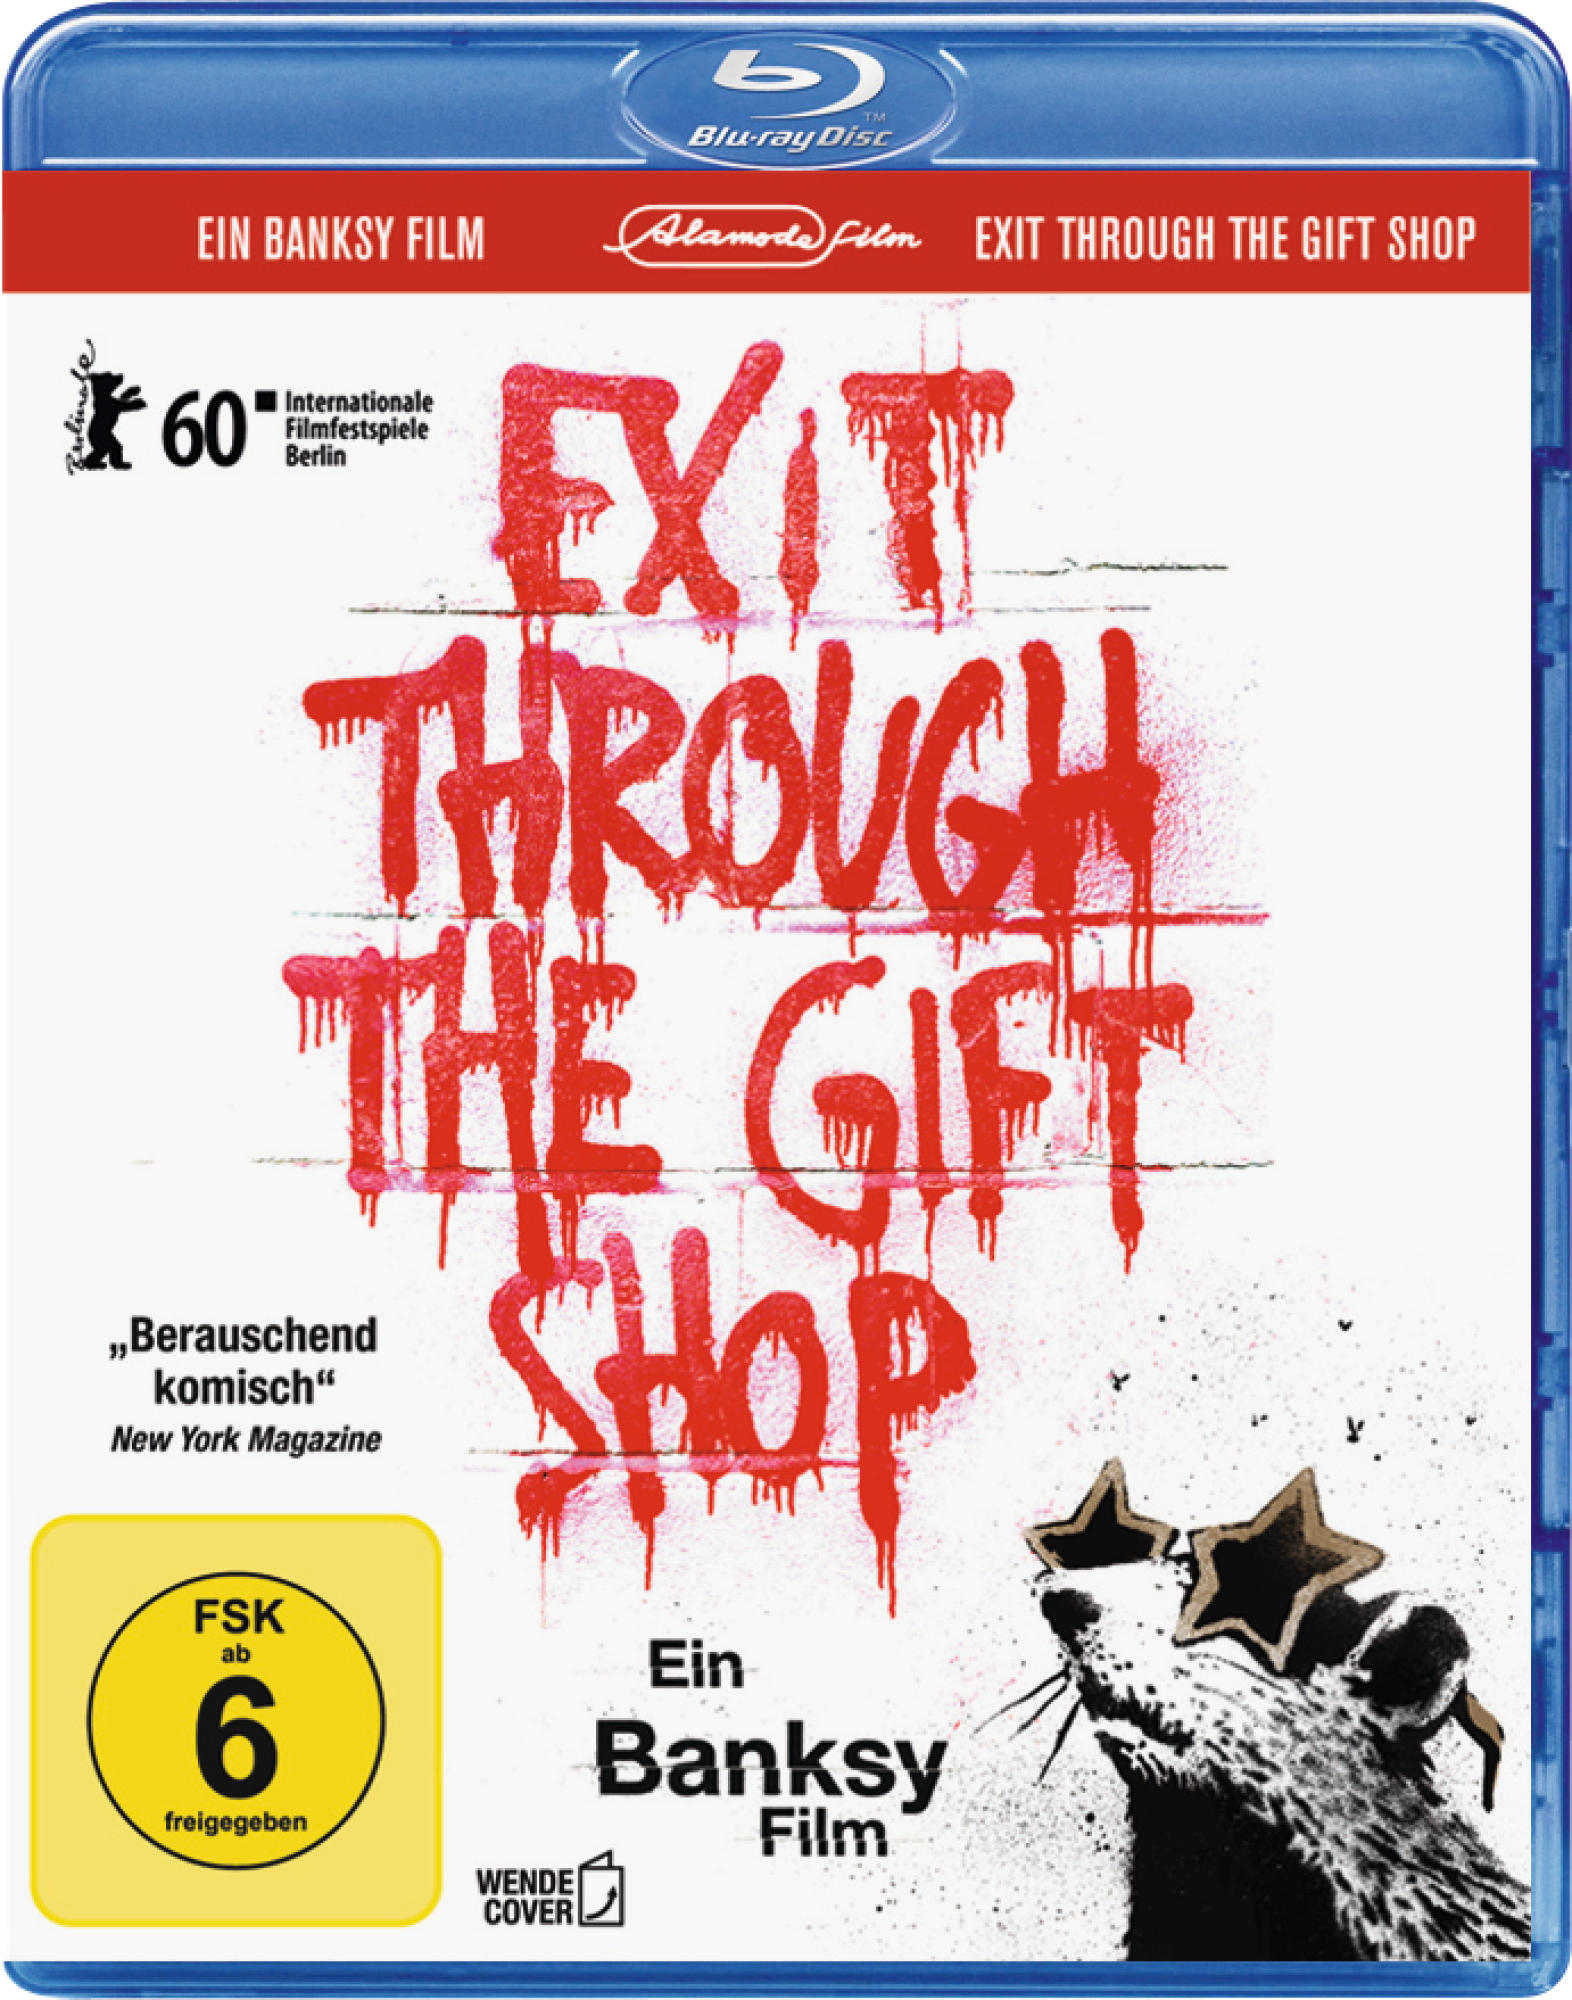 Exit Through Blu-ray Gift Shop the